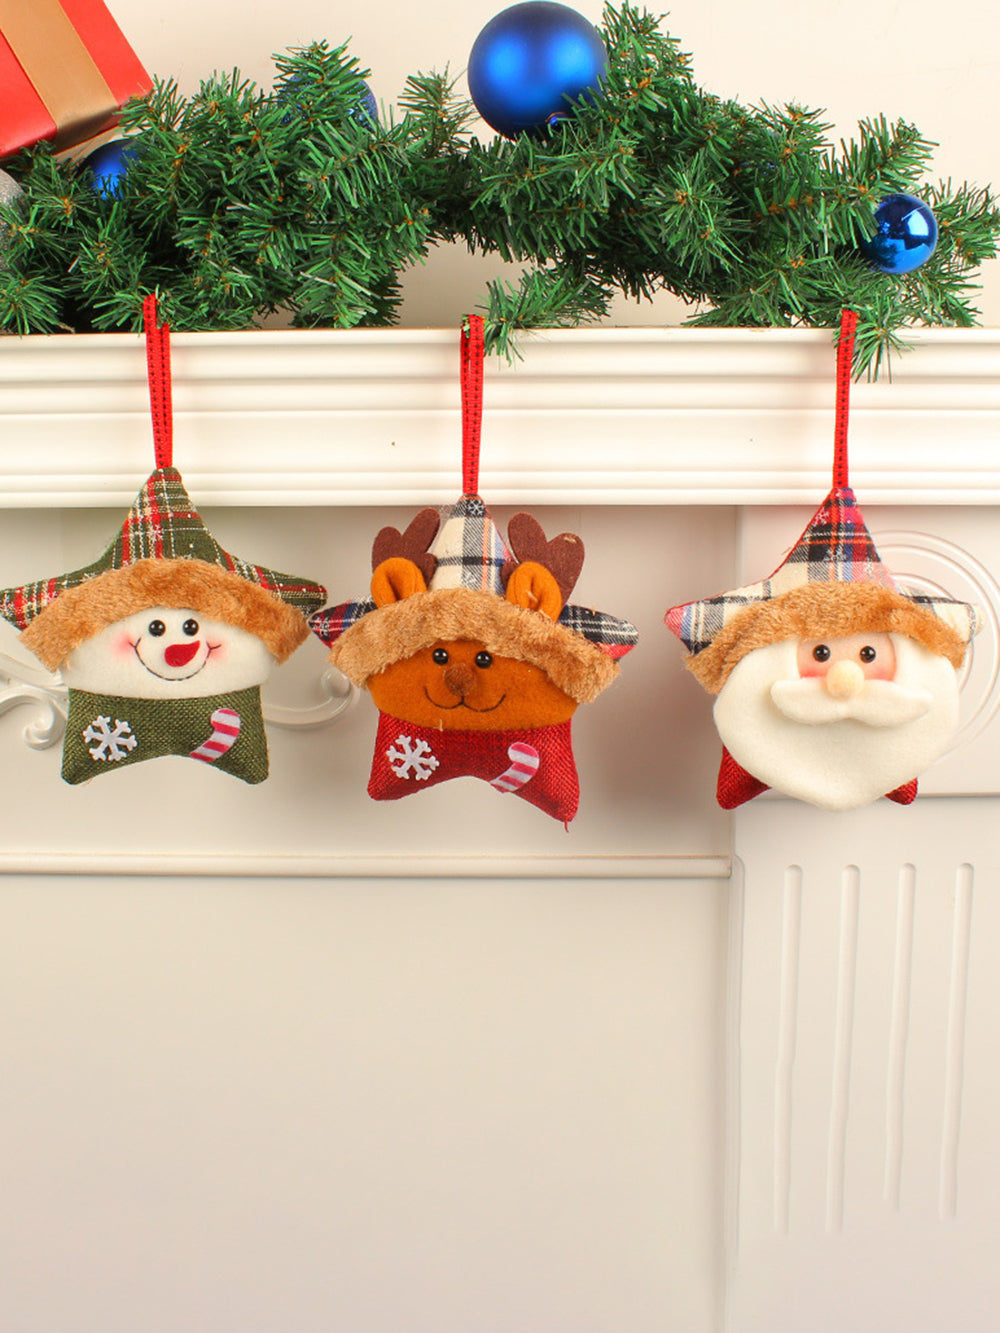 Santa Claus and Reindeer Christmas Tree Ornament with Star Plush Doll